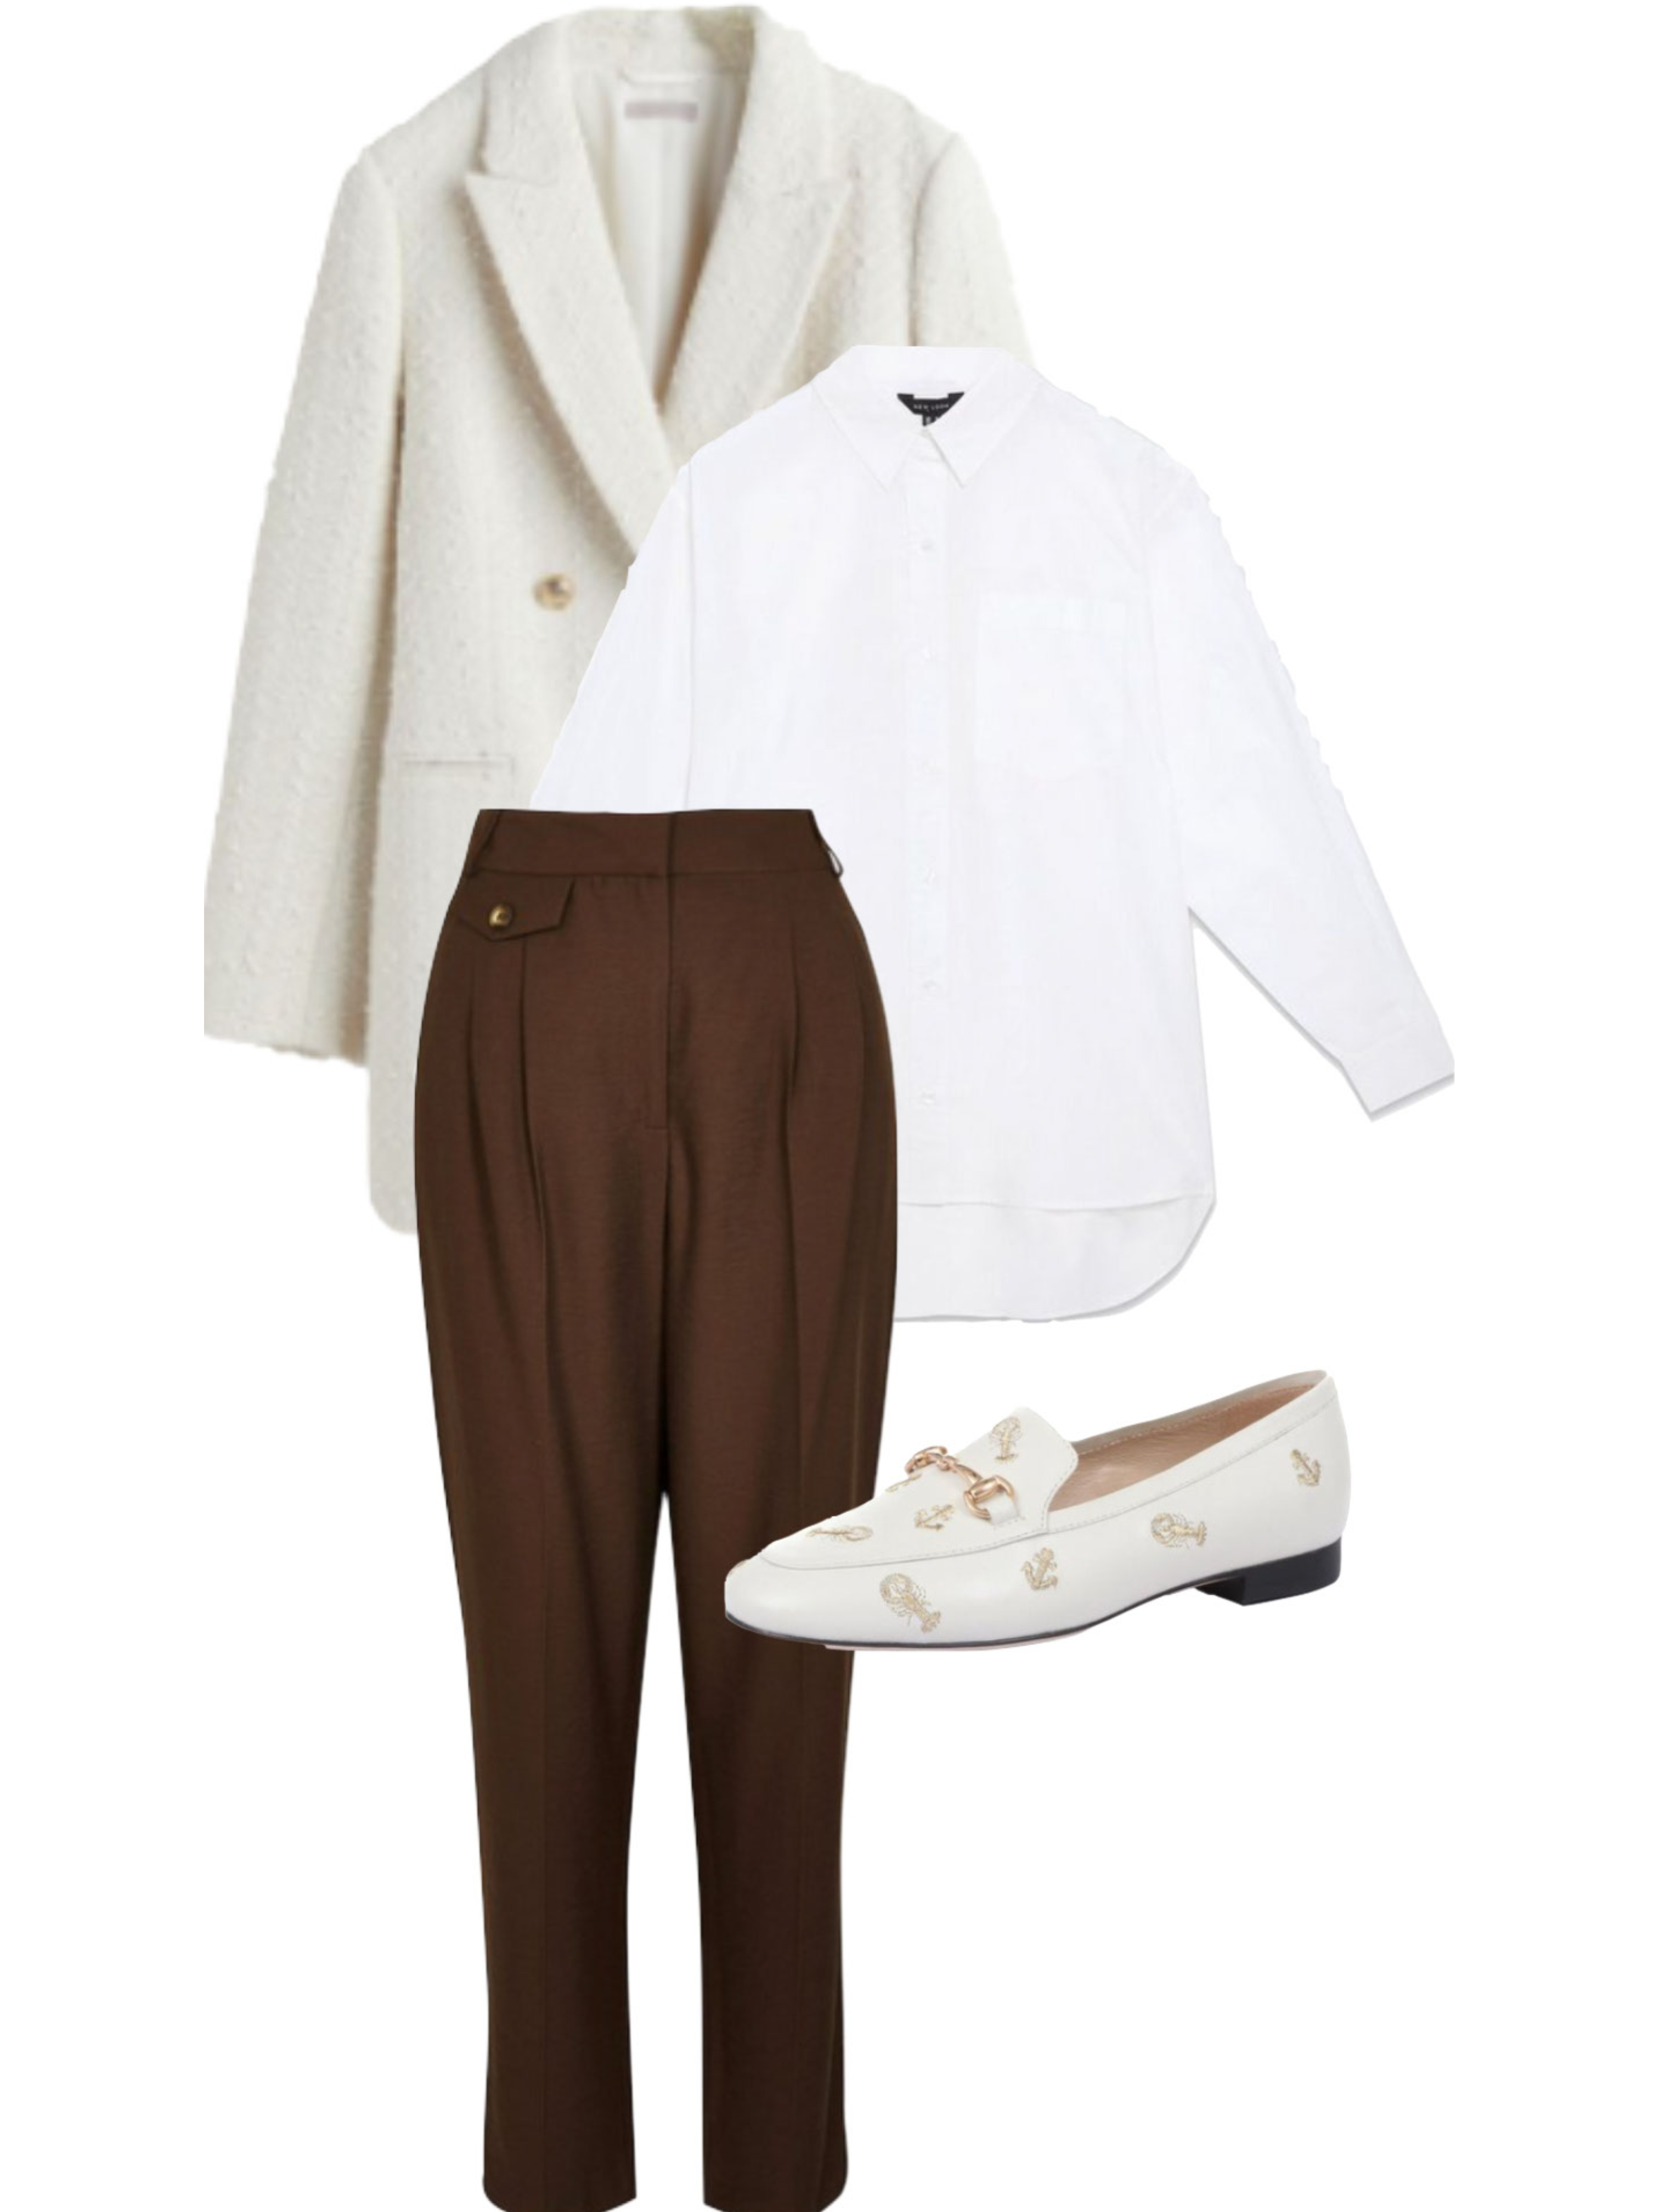 boucle-blazer-white-shirt-brown-trousers-loafers-spring-workwear-outfit-collage